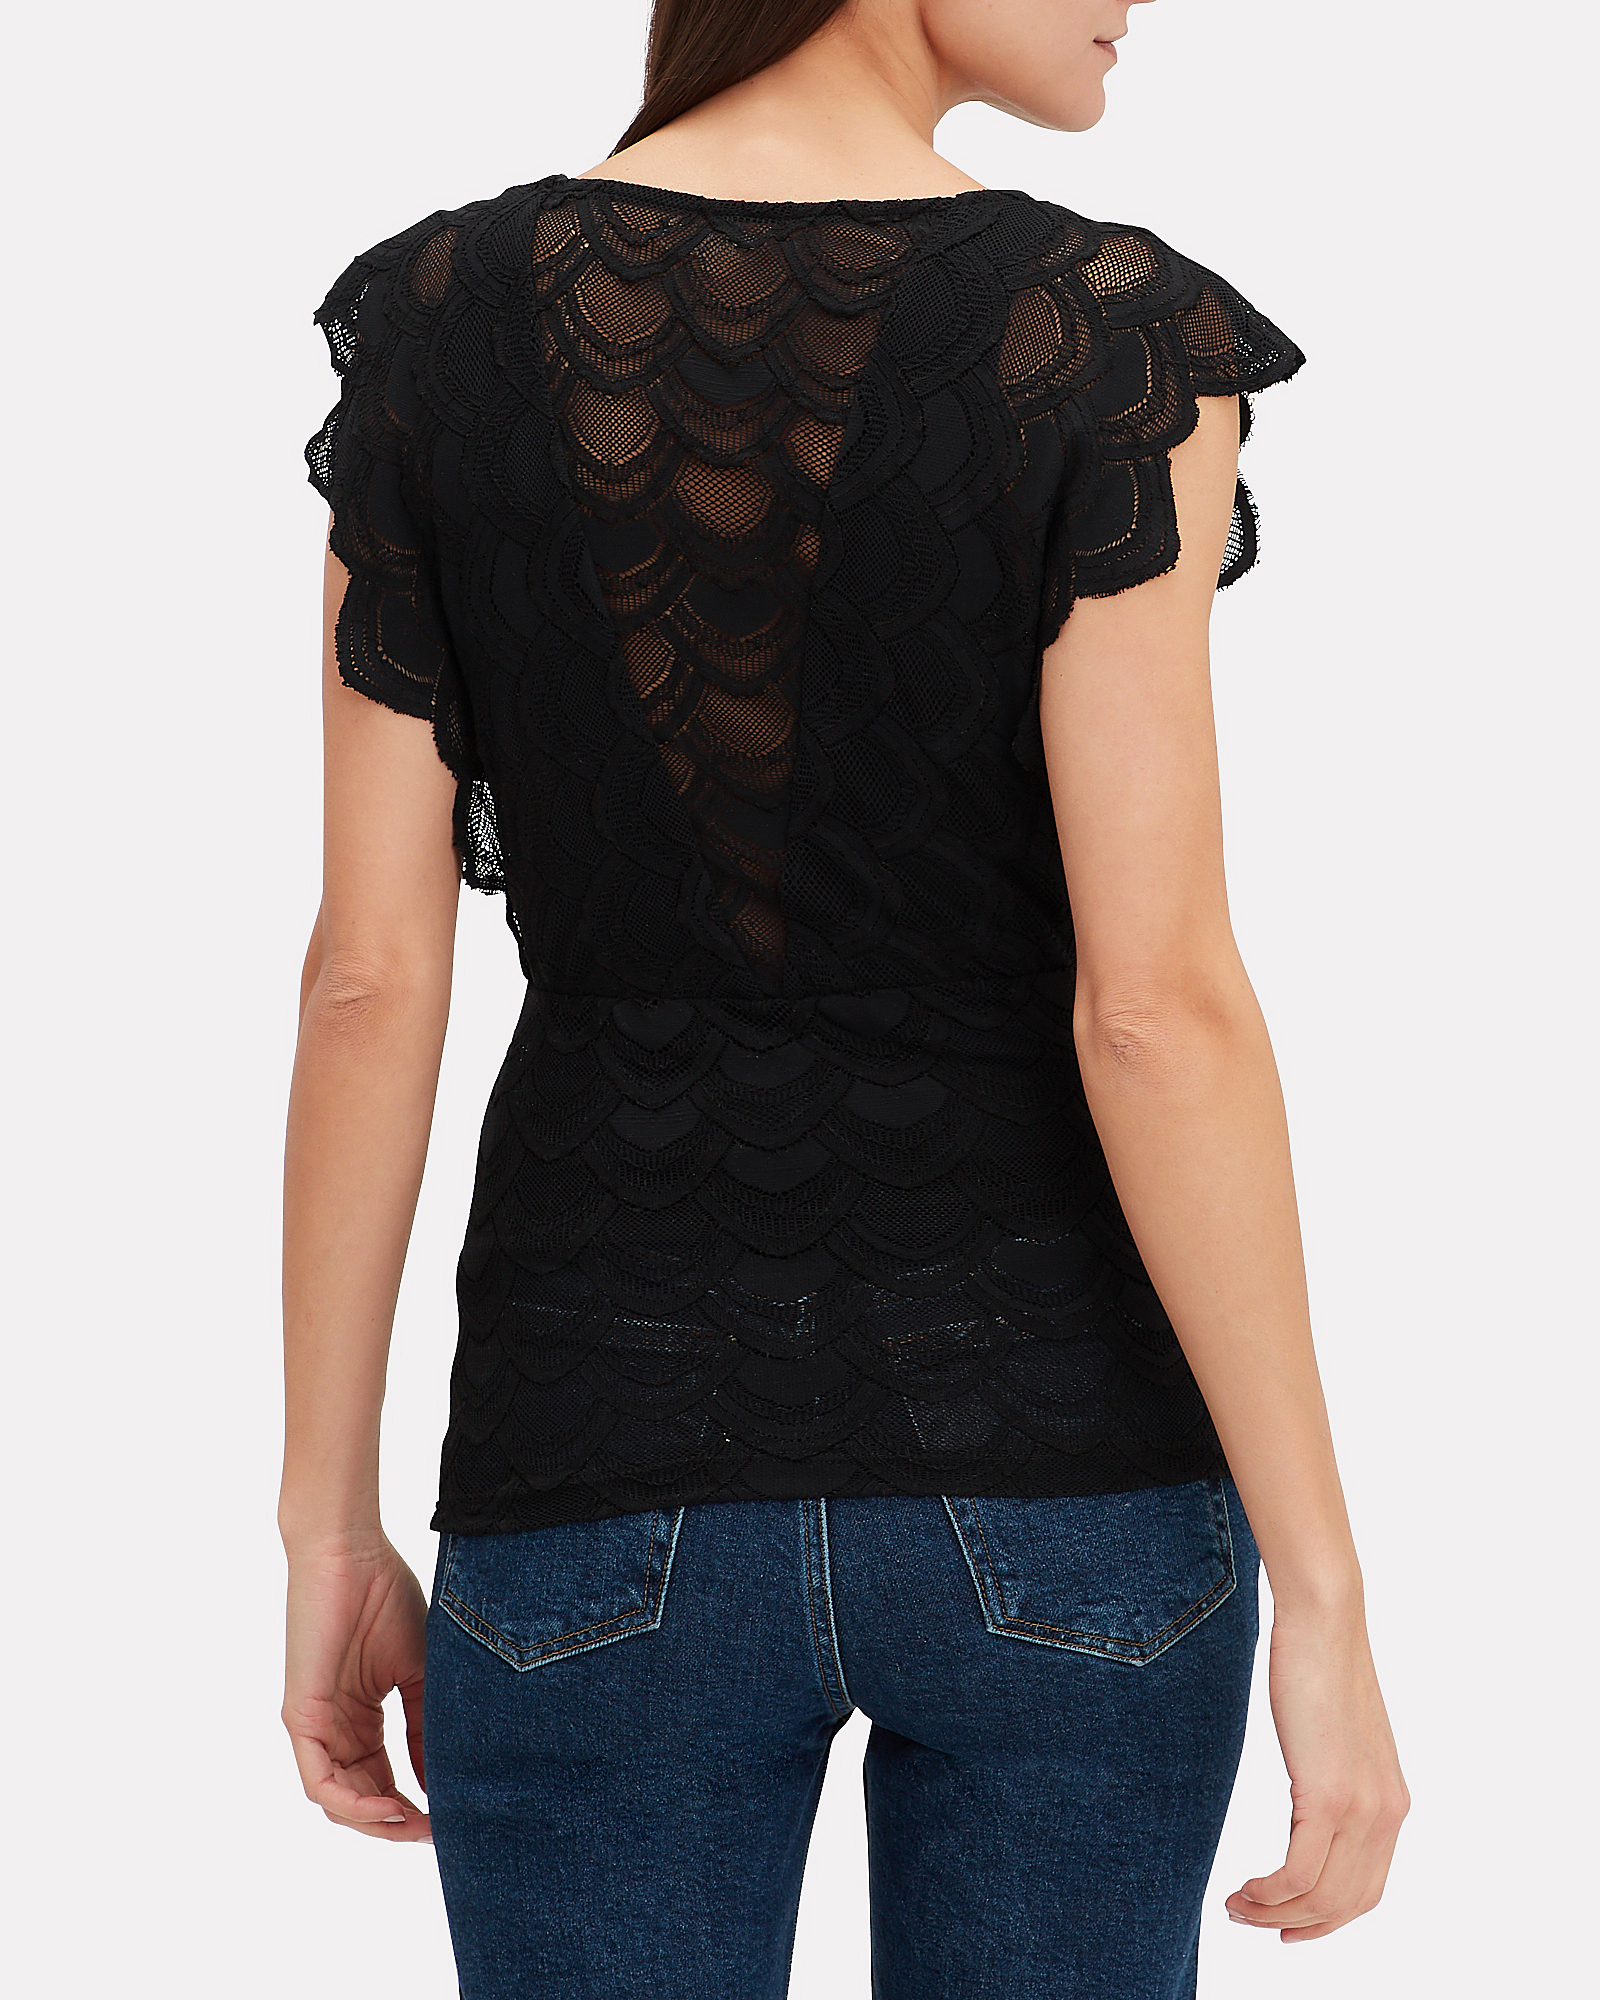 Caletto Lace Top | INTERMIX®